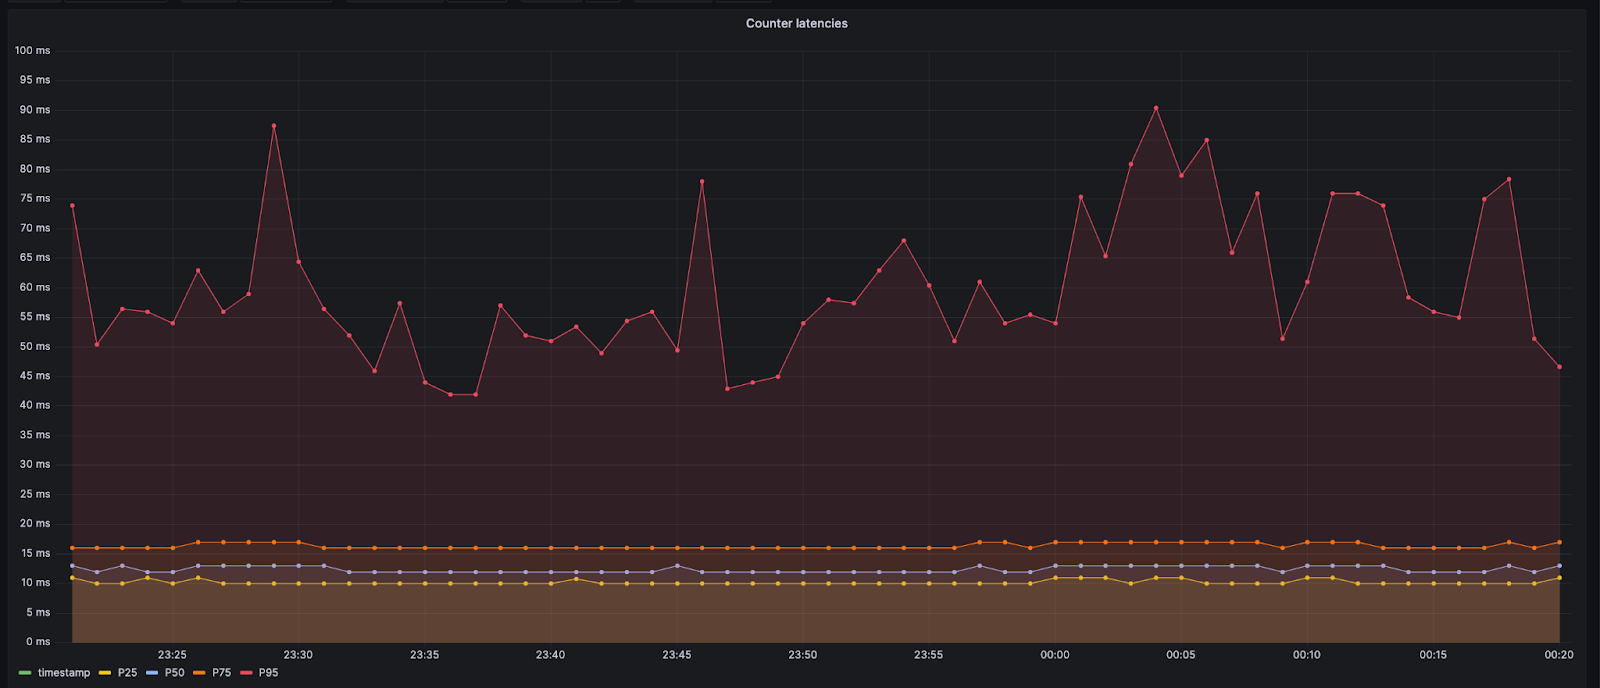 Graph showing percentile distribution of counter latencies from our production dashboard